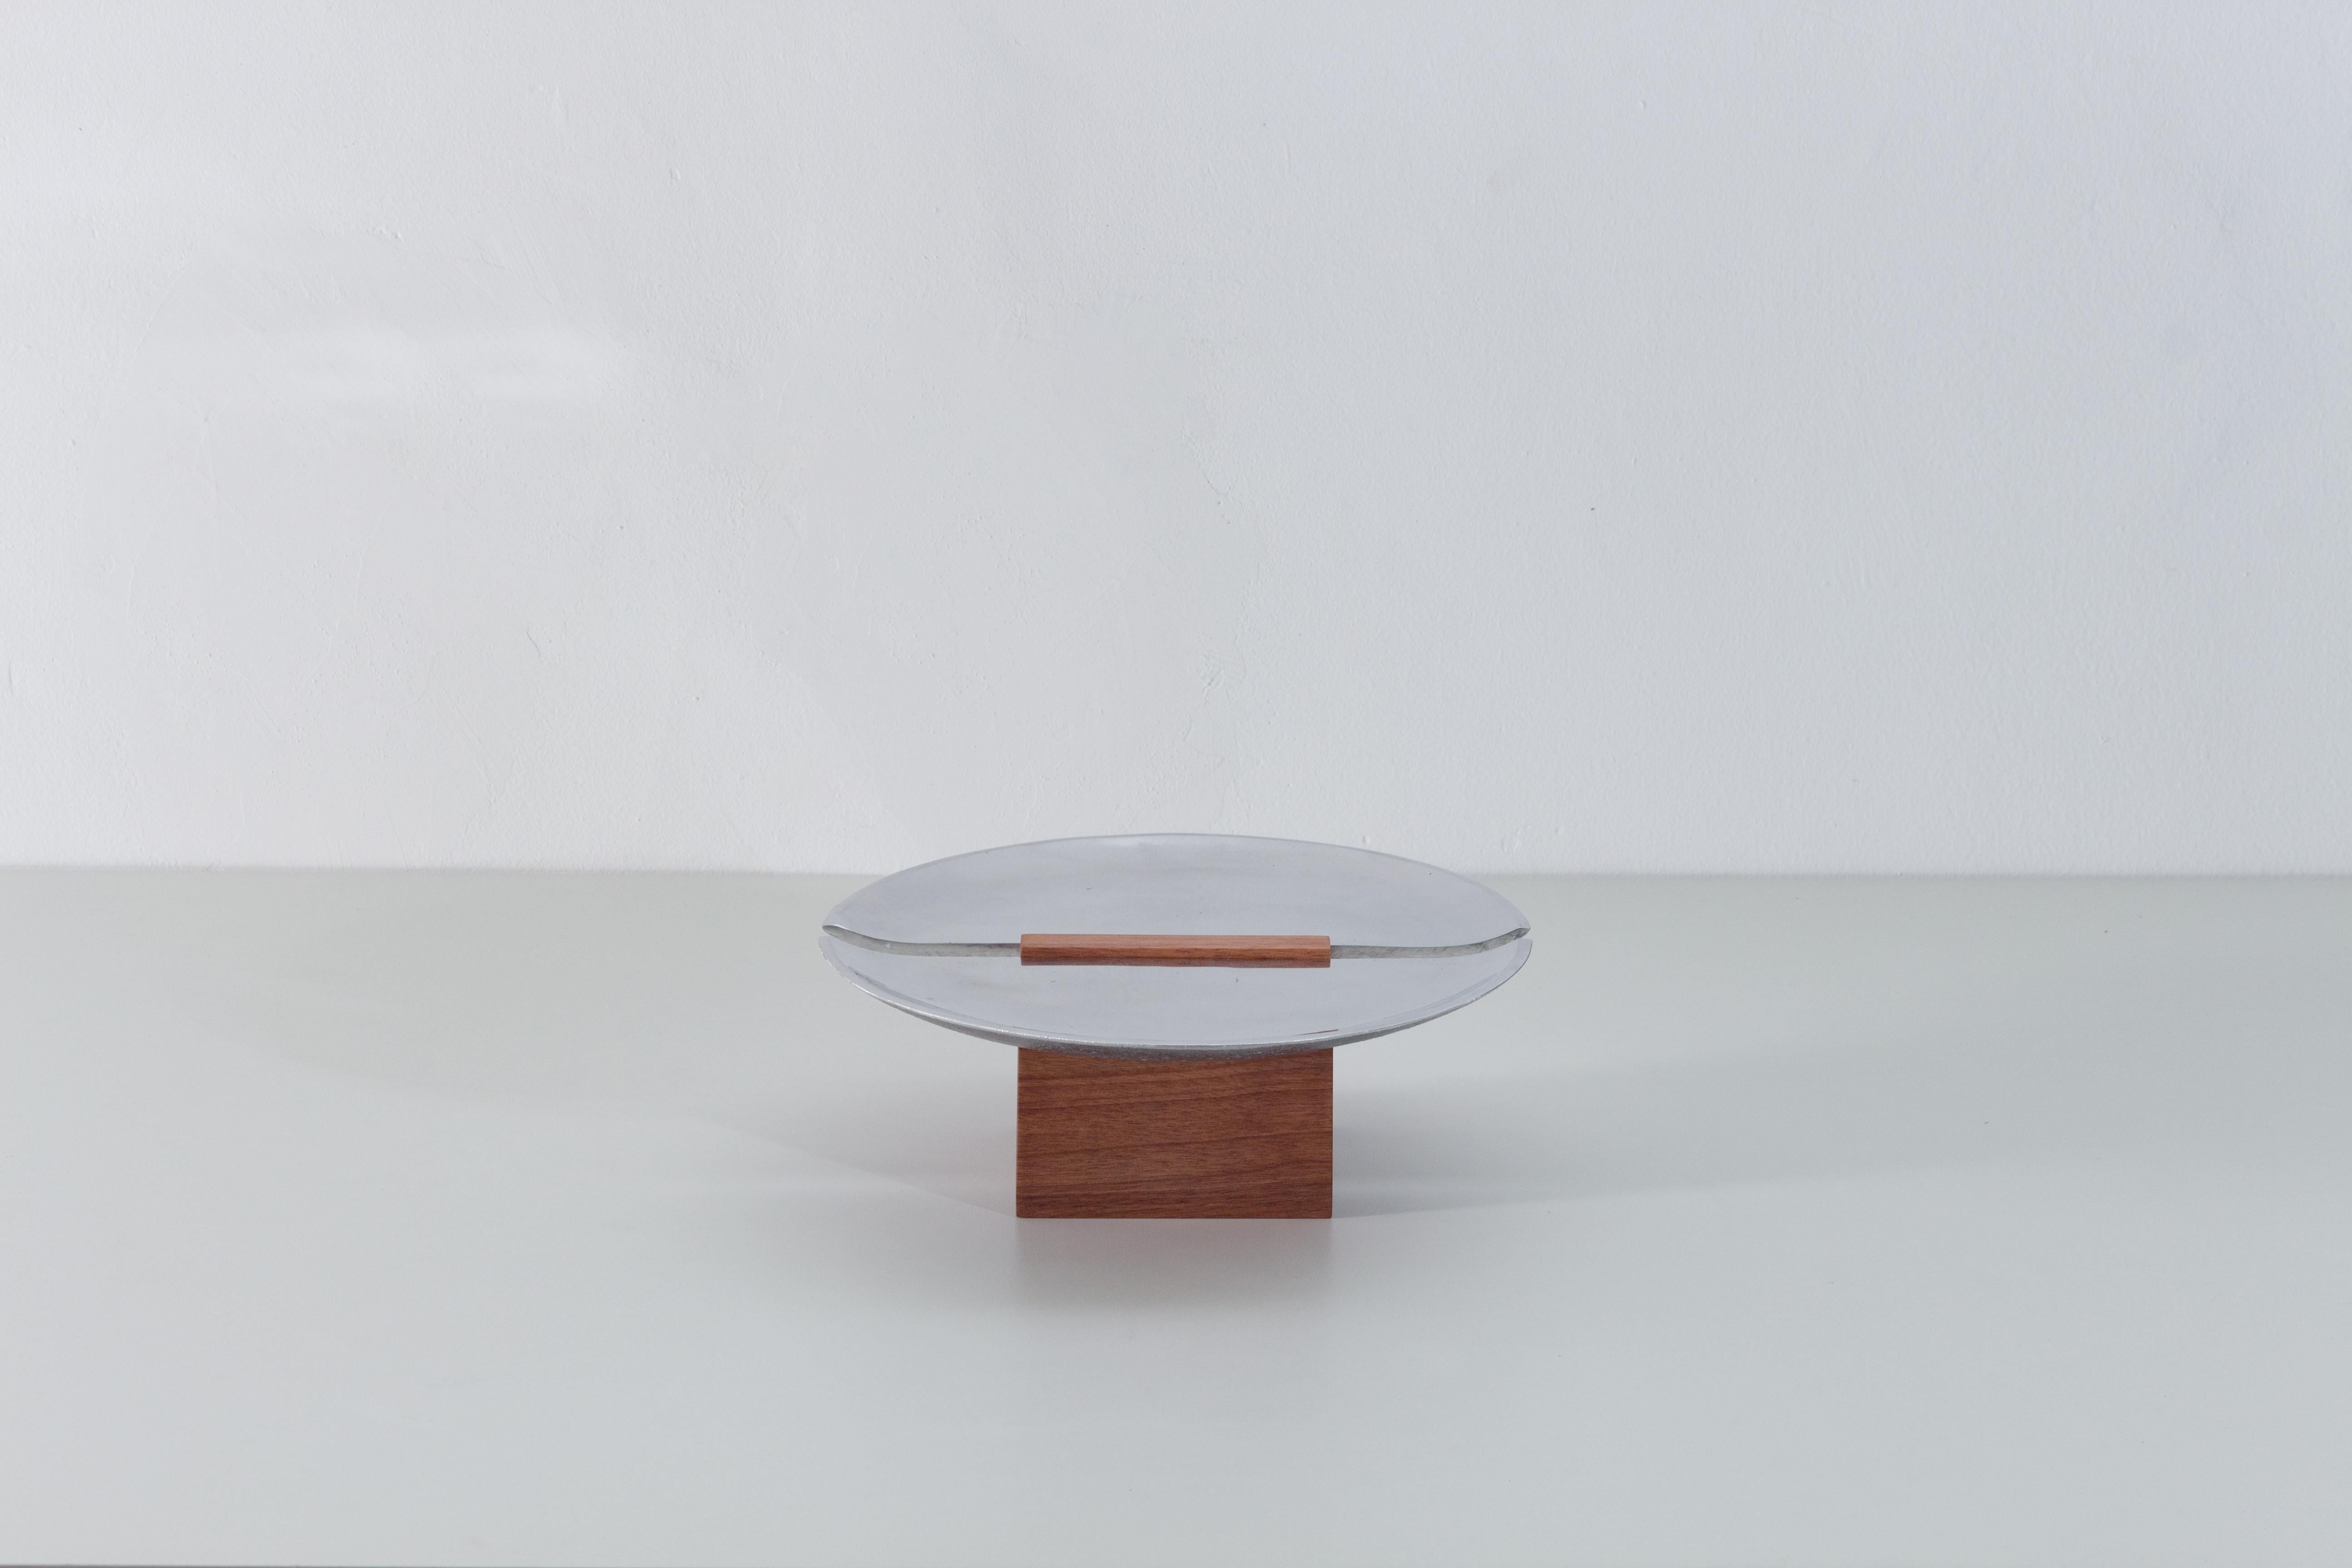 Winner of the 2023 EDIDA Brazil (Elle Deco International Design Awards) in the Objects Category.

Beira is a collection of centerpieces defined by geometric wood and metal elements. A cut divides the metal surface in two and, in between them, the